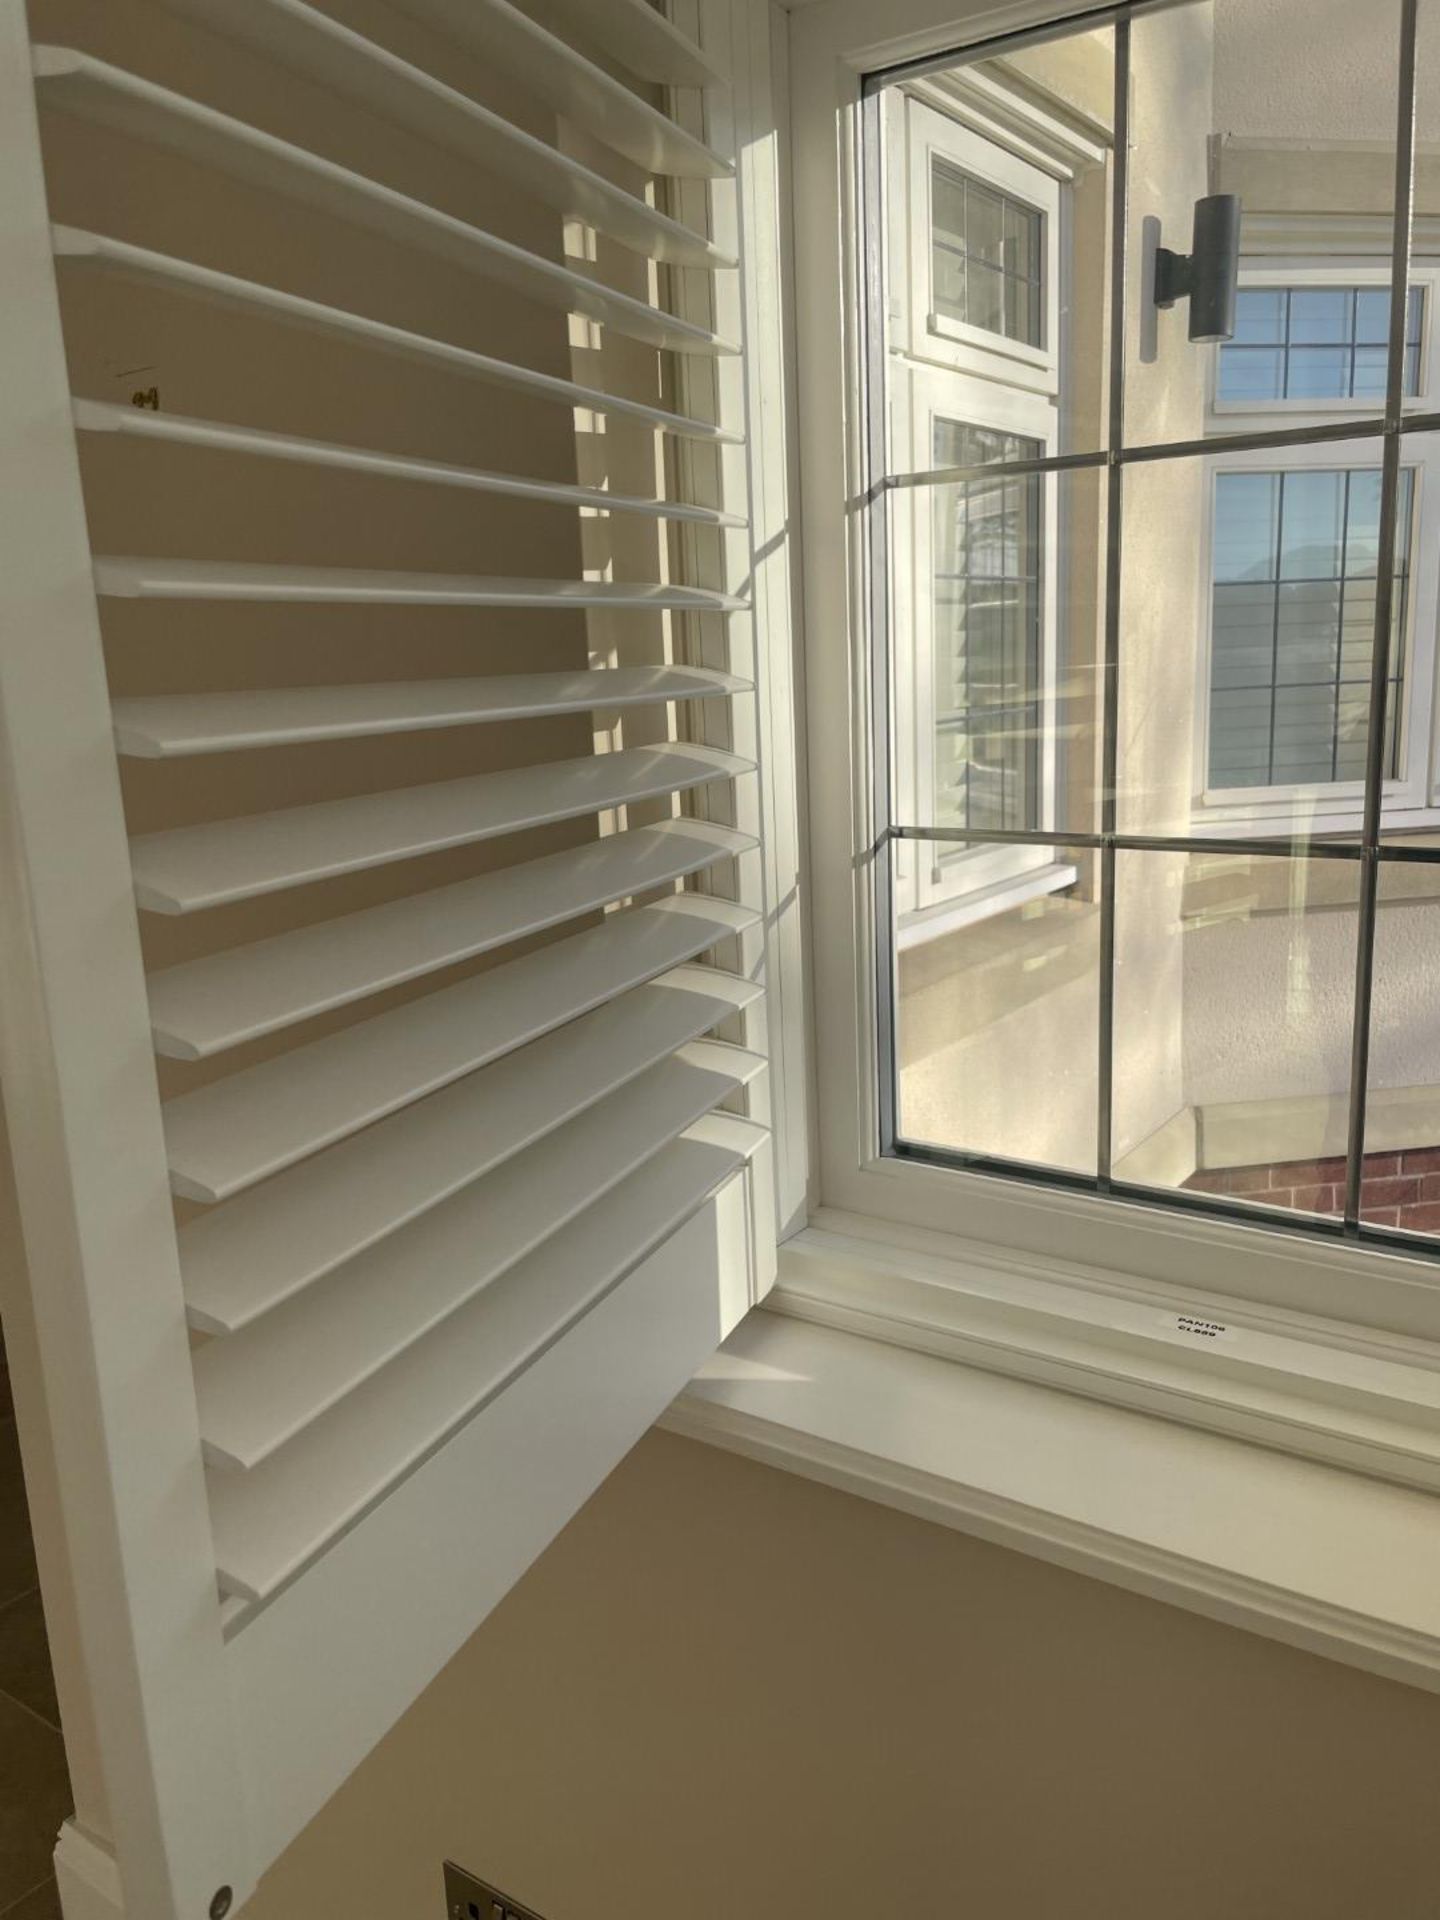 1 x Hardwood Timber Double Glazed Window Frames fitted with Shutter Blinds, In White - Ref: PAN106 - Image 23 of 23